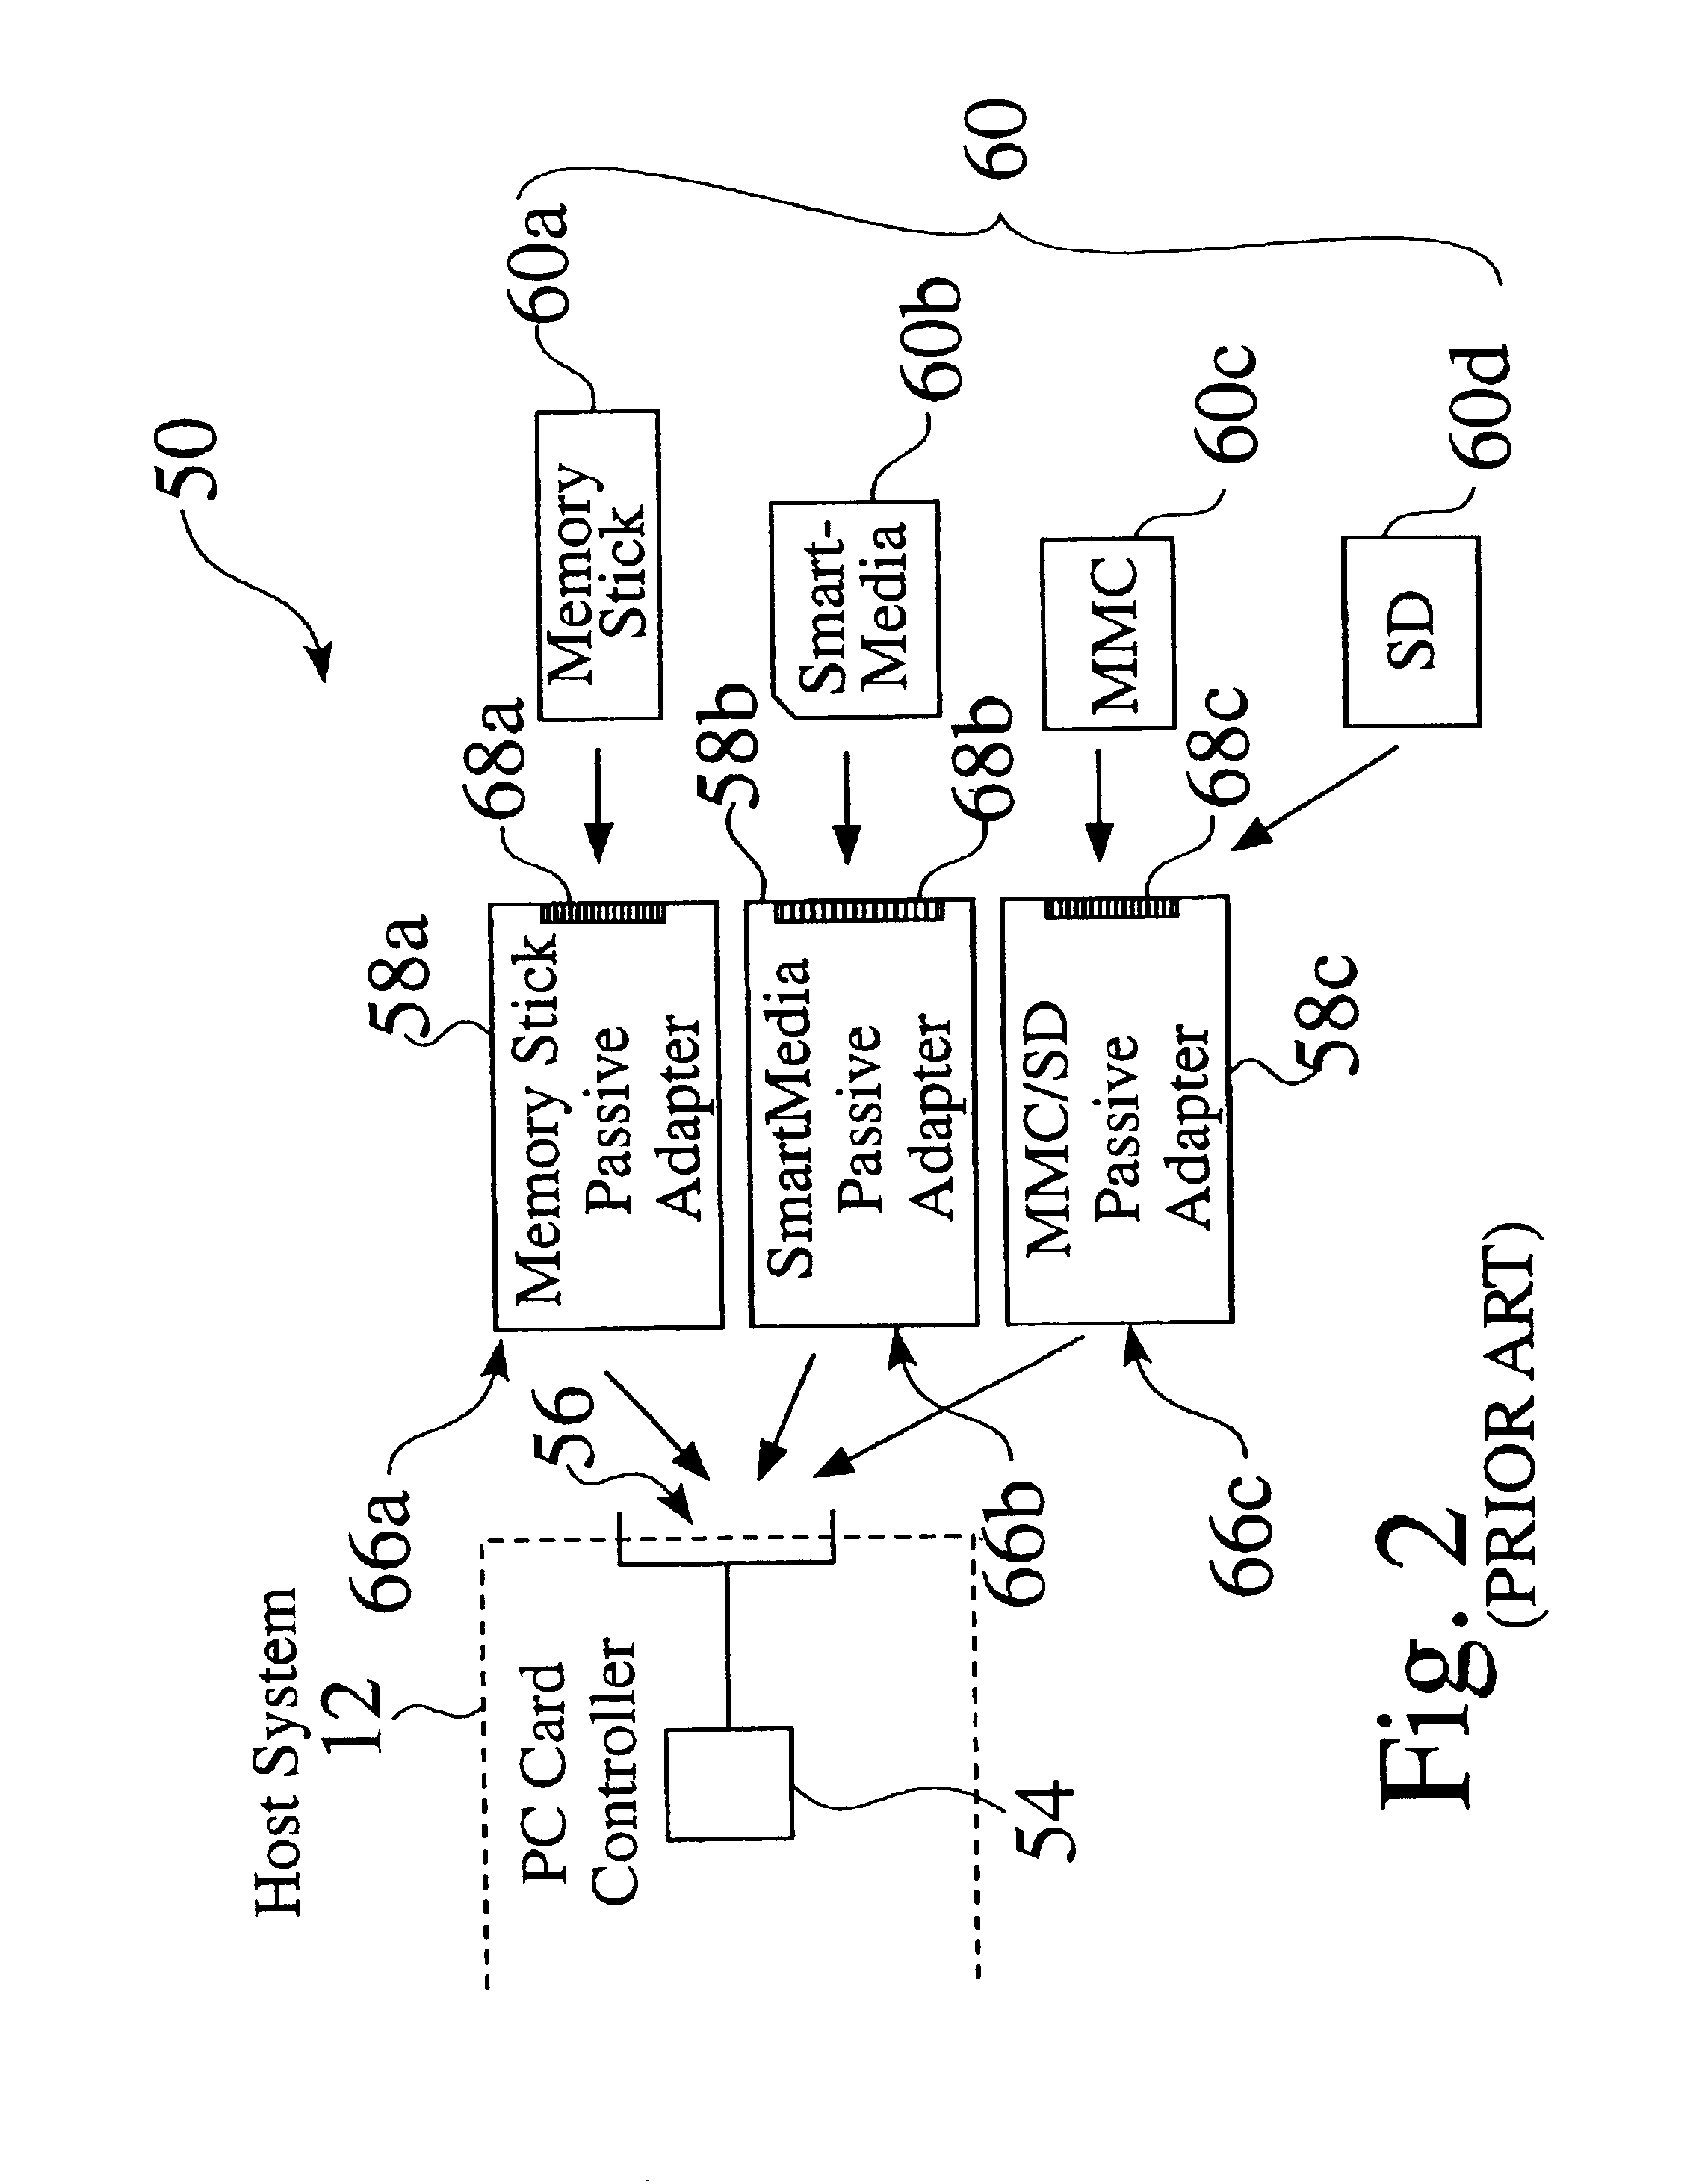 System and method capable of offloading converter/controller-specific tasks to a system microprocessor